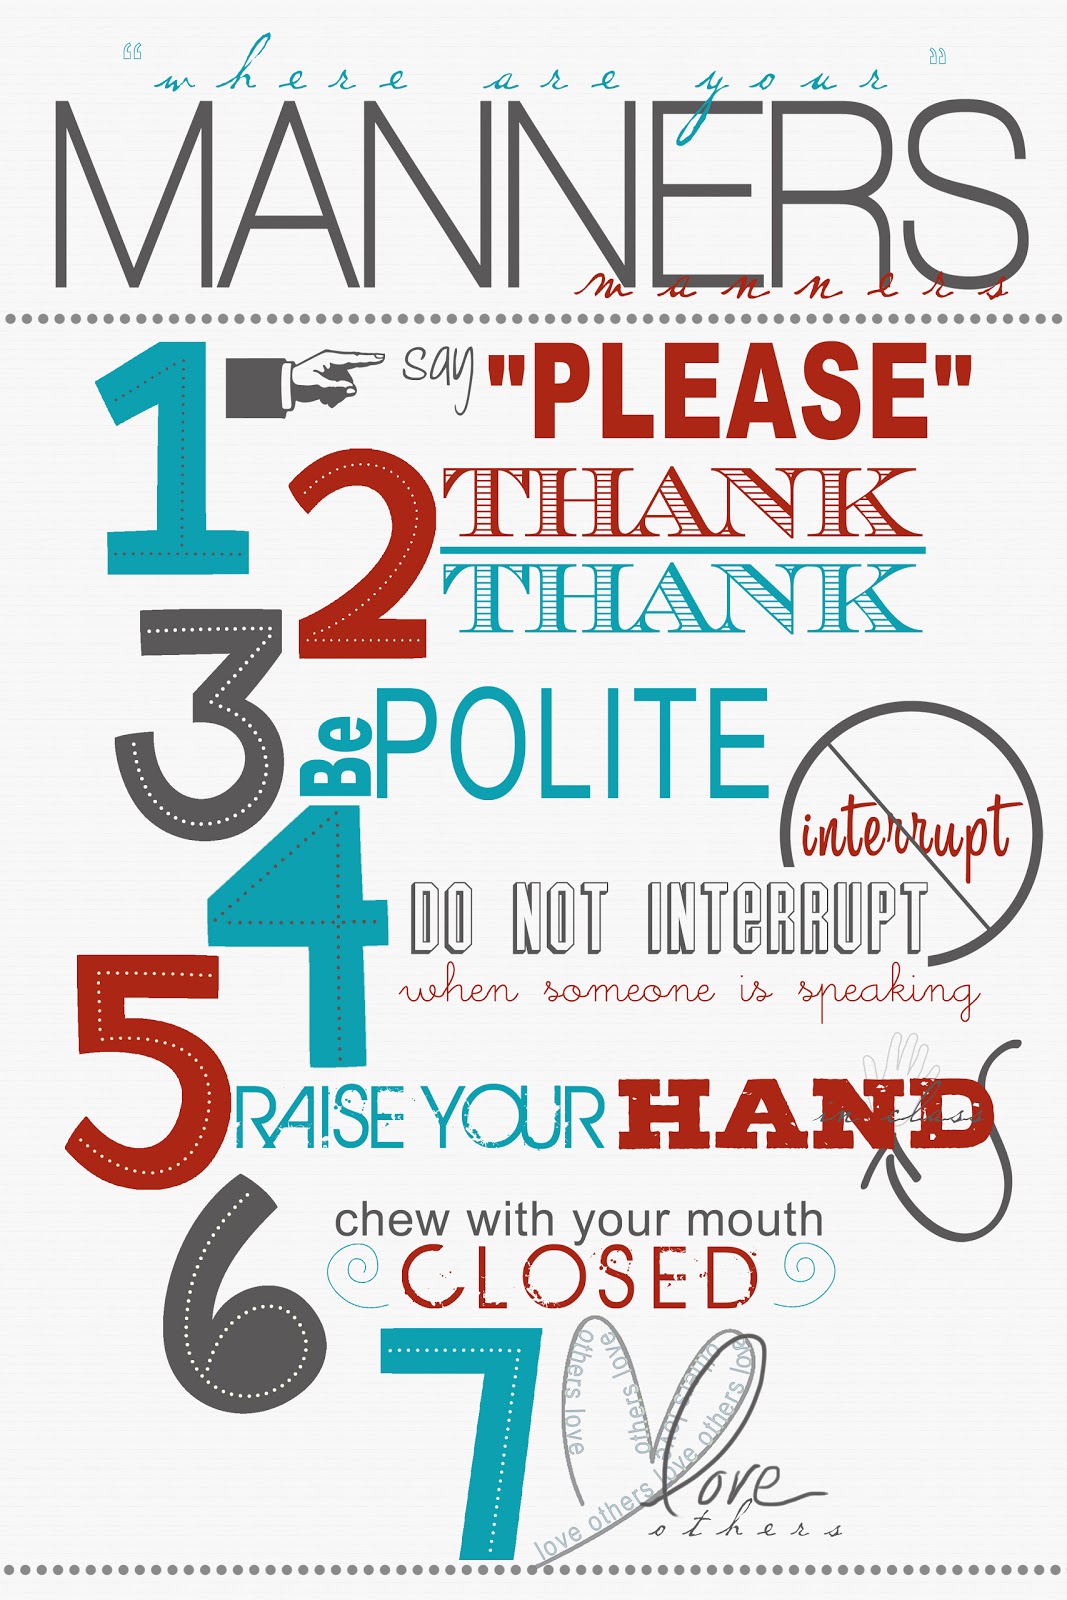 clipart of good manners - photo #45